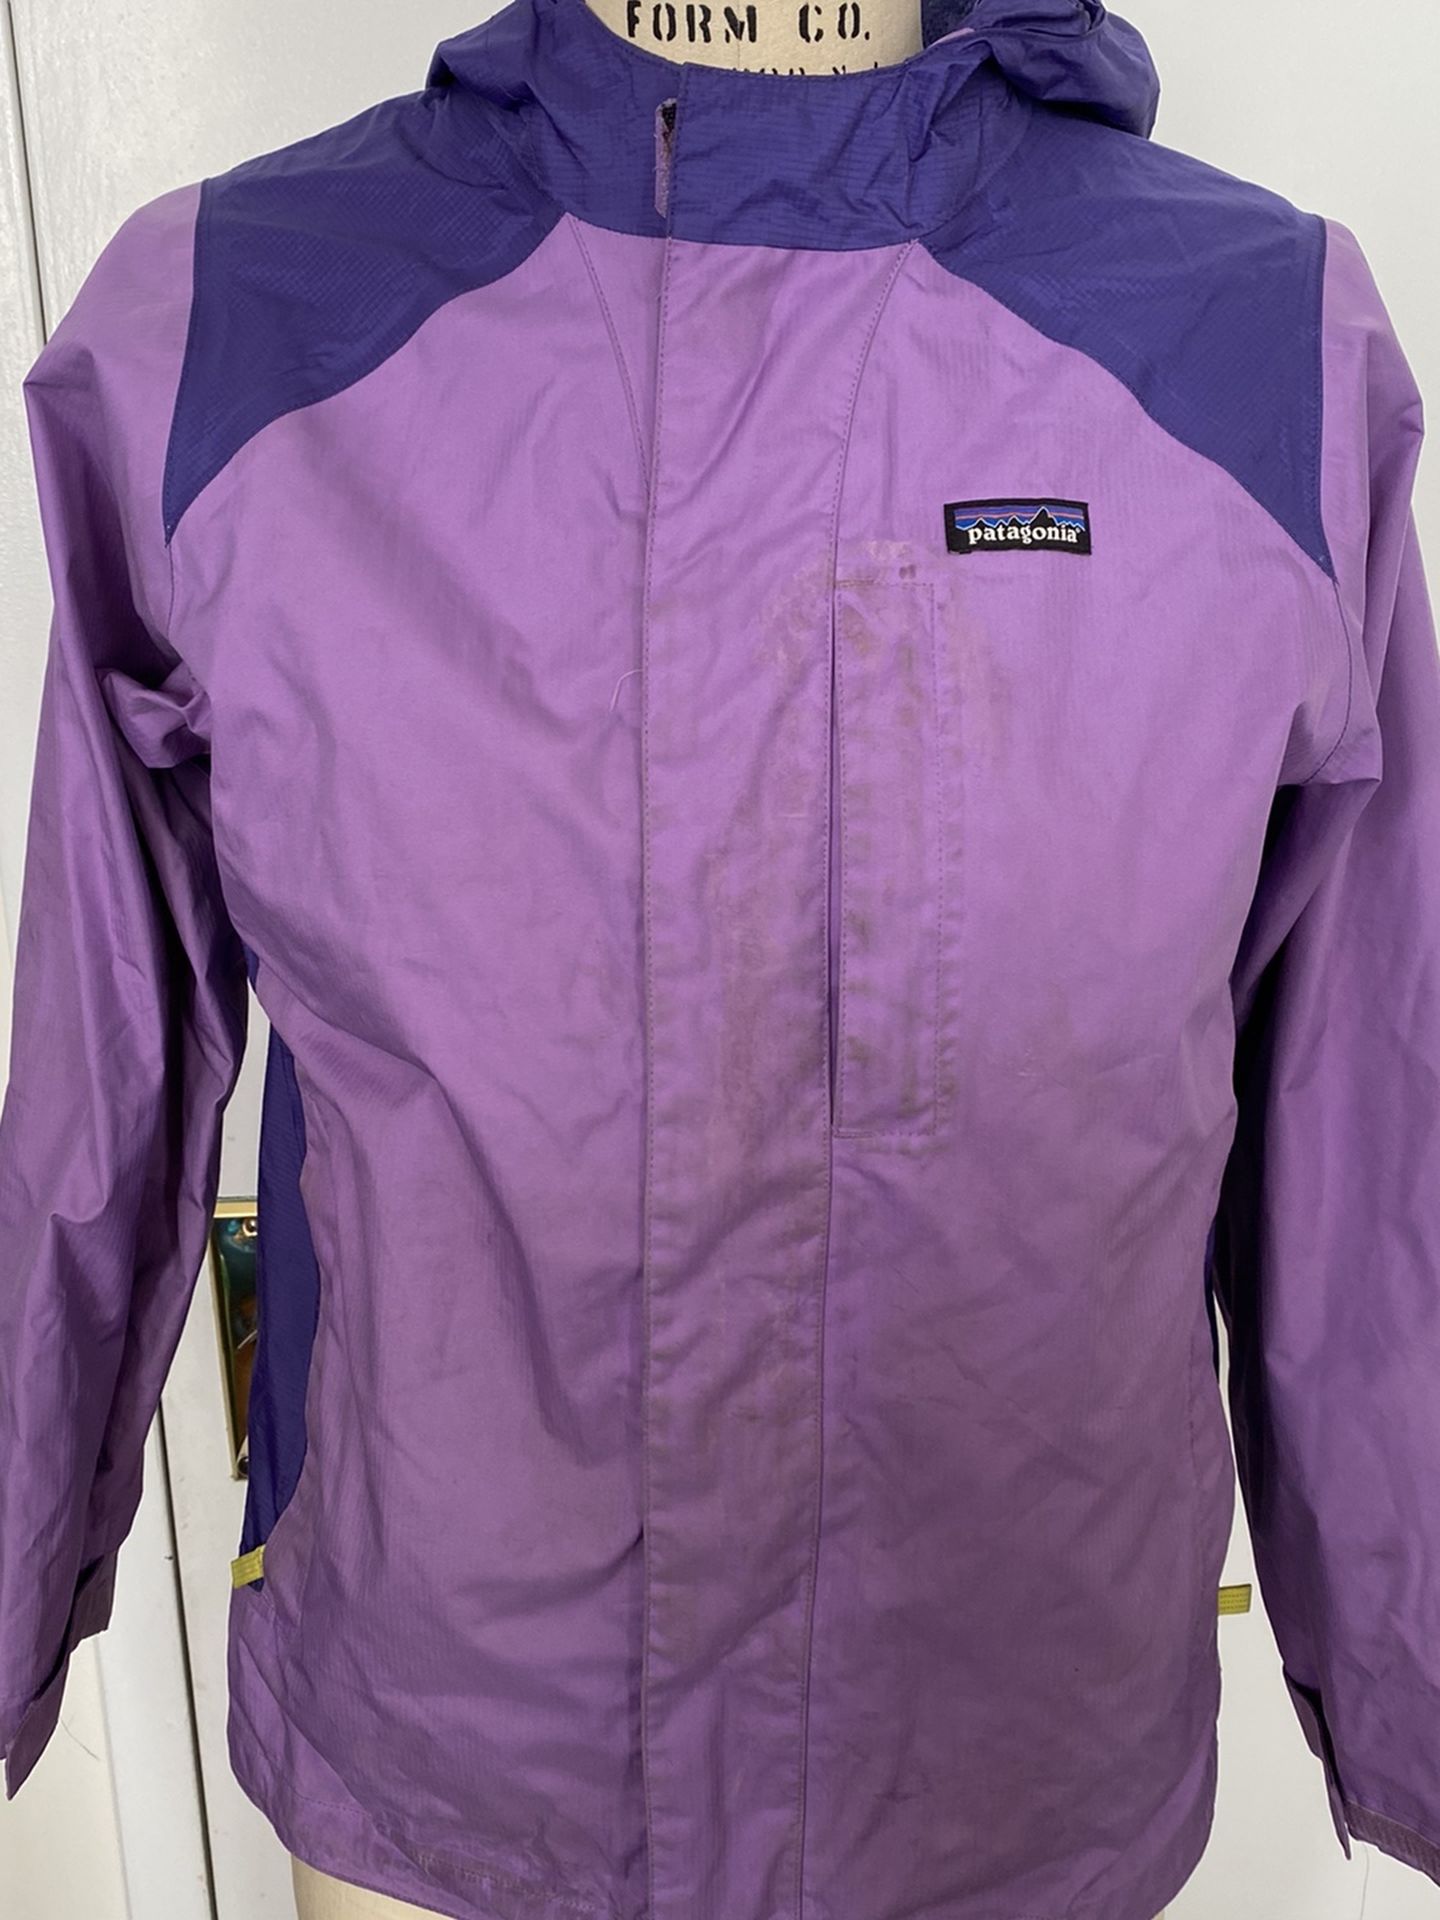 Patagonia Girls Purple / Lilac H2No Windbreaker Jacket waterproof XXL 16-18. Condition is "Pre-owned". See pictures ask questions and make an offer!